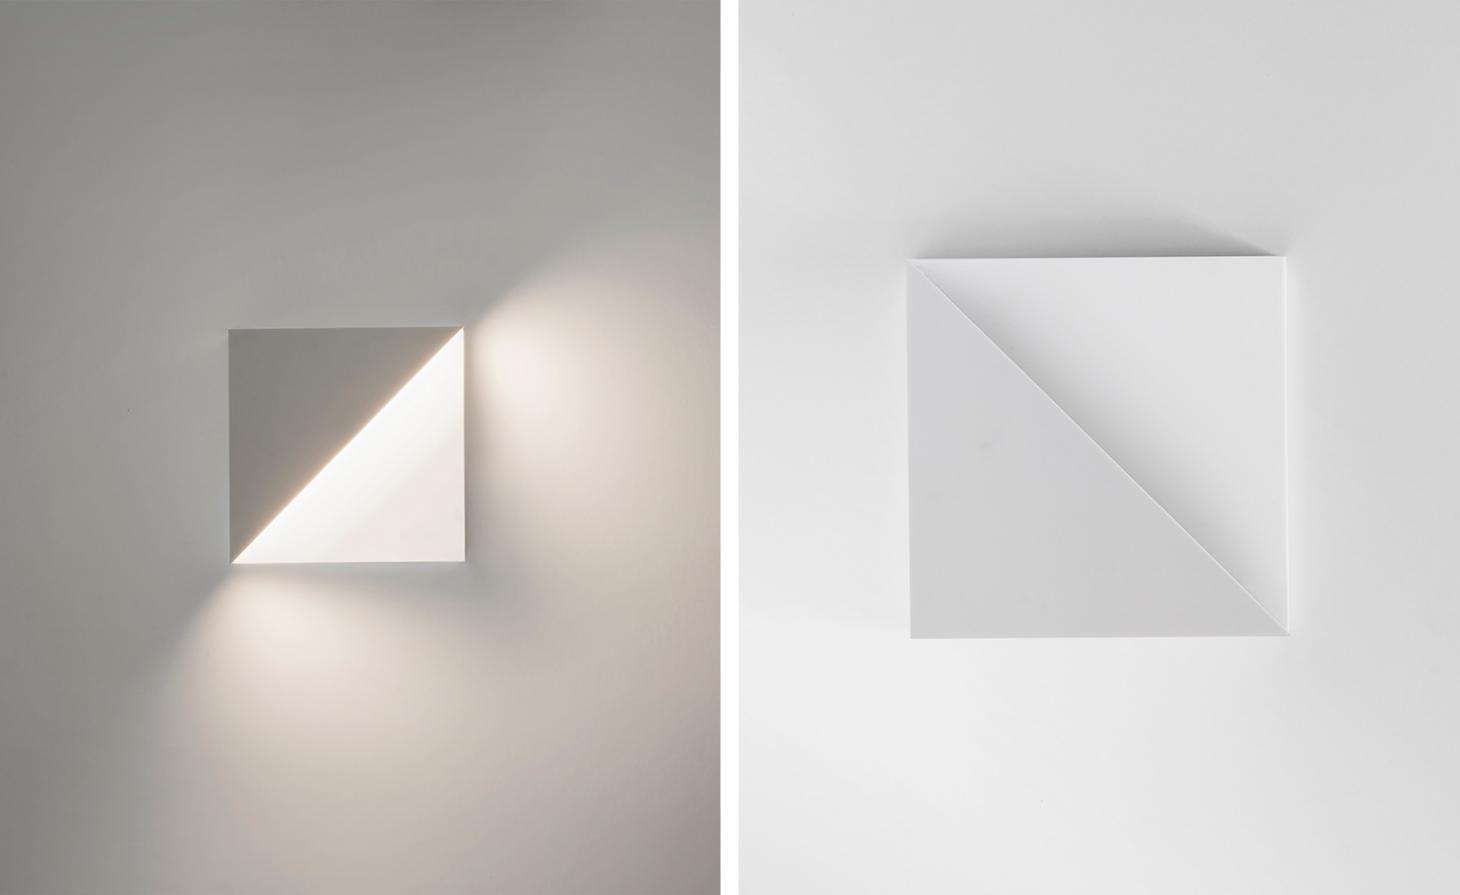 richard meier debuts new lighting collection at ralph pucci gallery new york-12